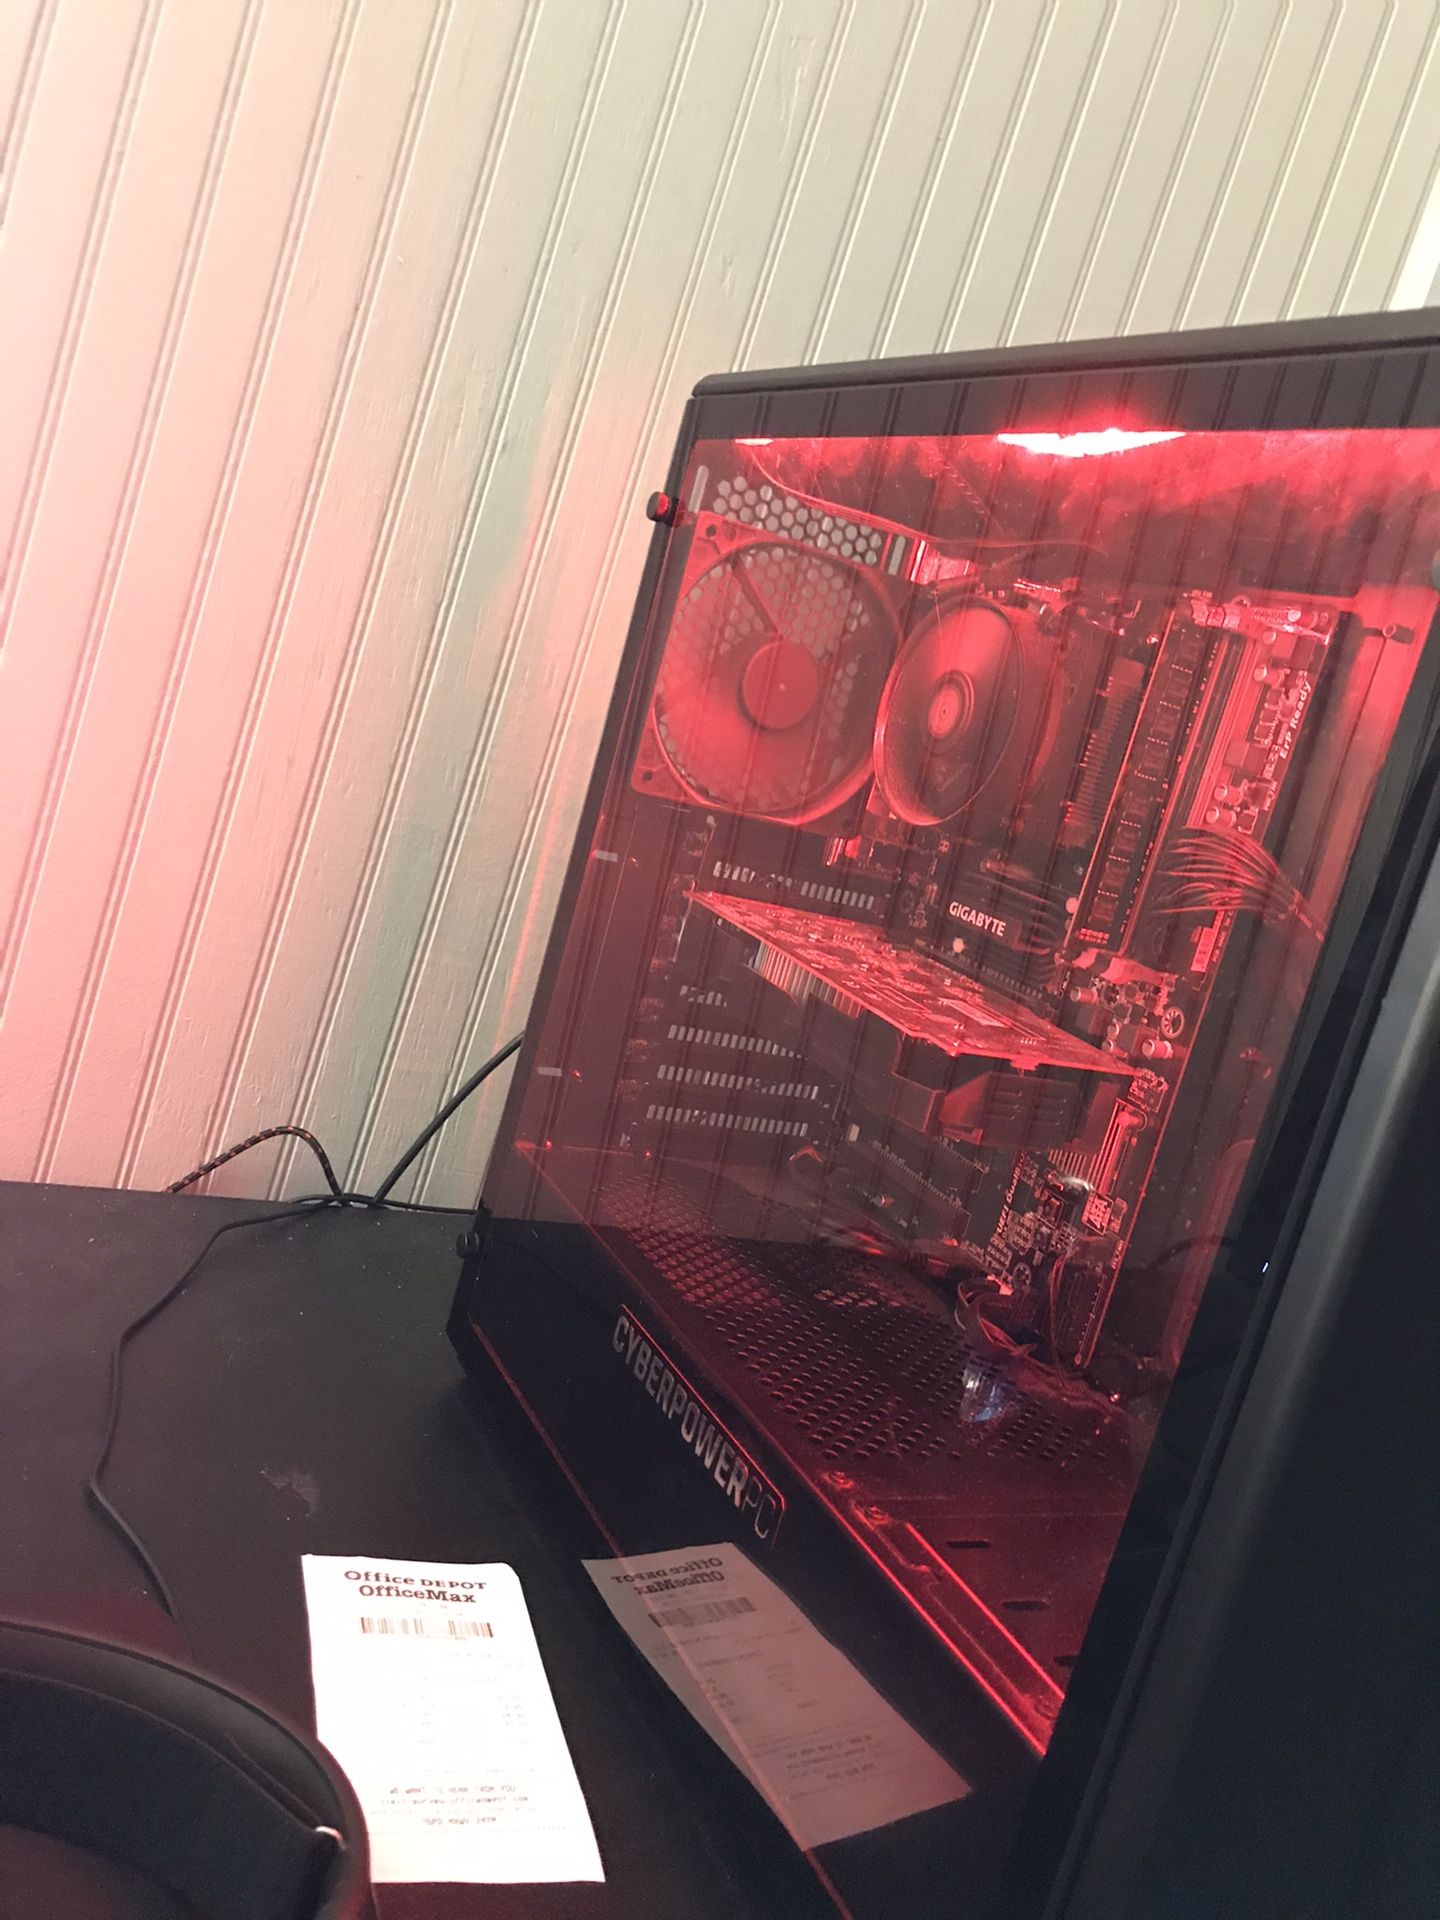 Cyberpower Gaming Pc